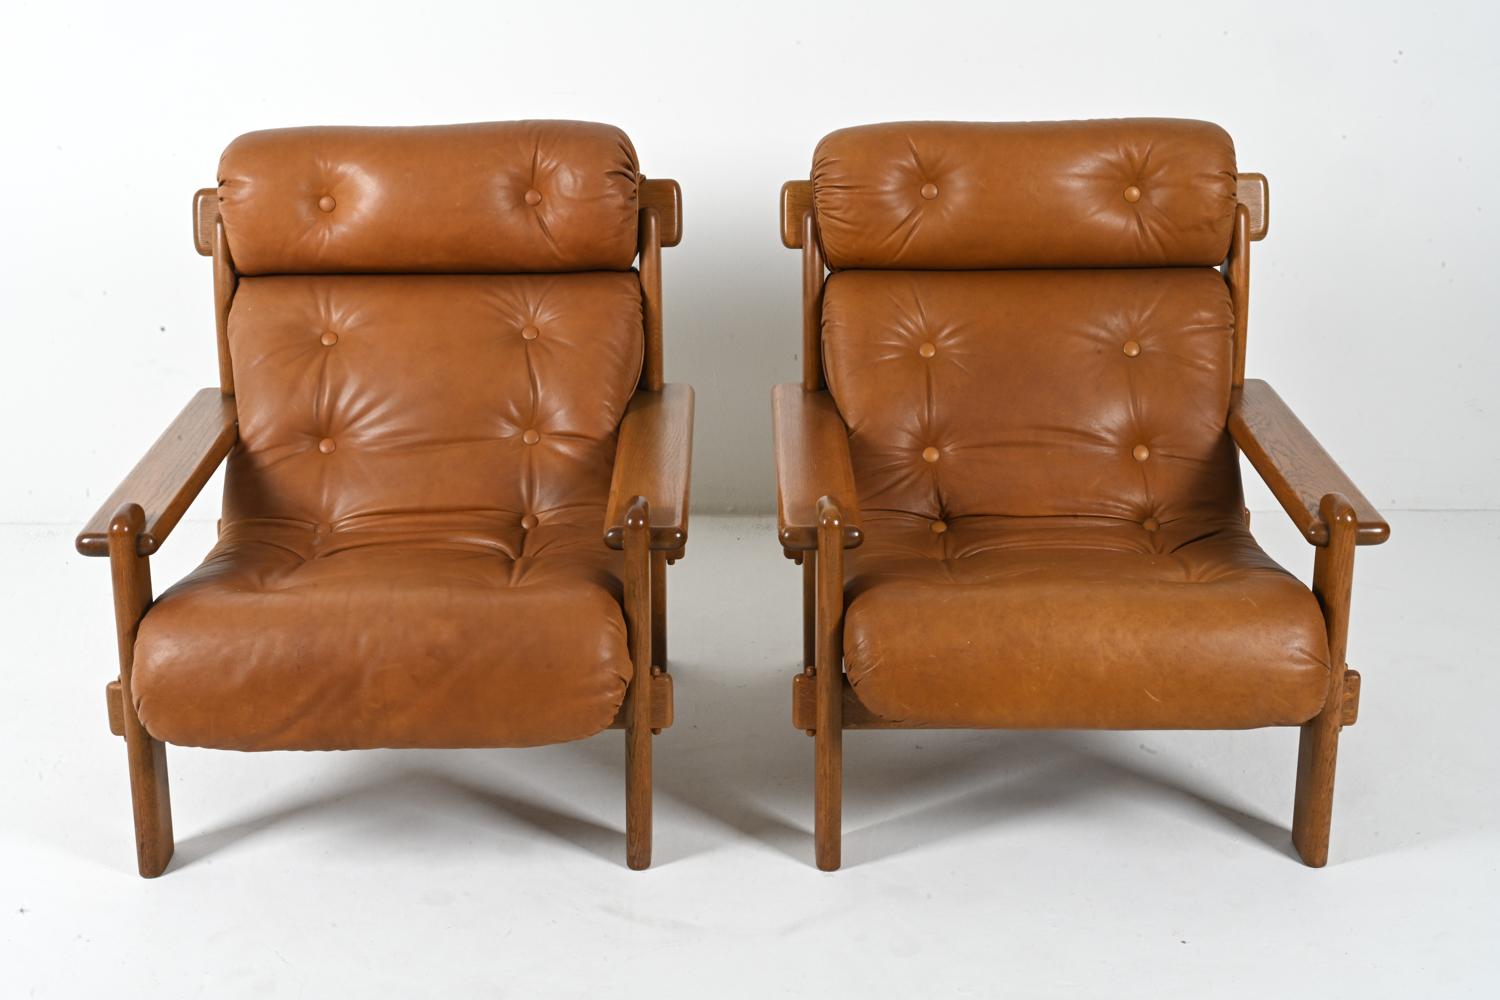 Pair of European Brutalist Armchairs in Oak & Leather, c. 1970's In Good Condition For Sale In Norwalk, CT